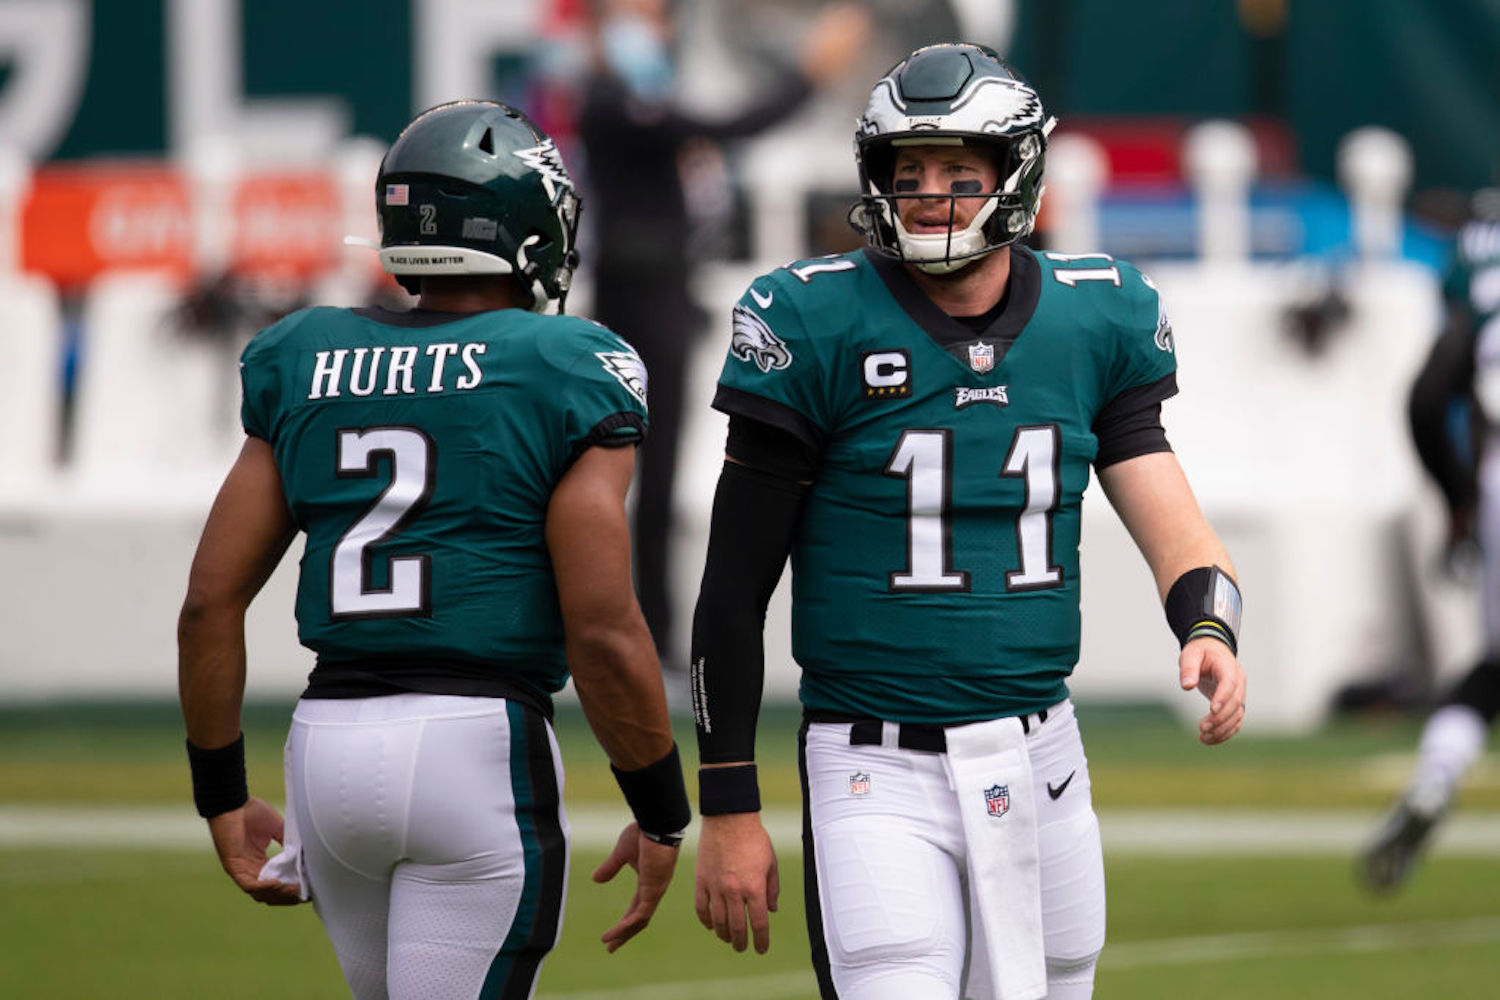 The Philadelphia Eagles have been giving Jalen Hurts first-team reps in practice, and he's on his way to stealing Carson Wentz's job.